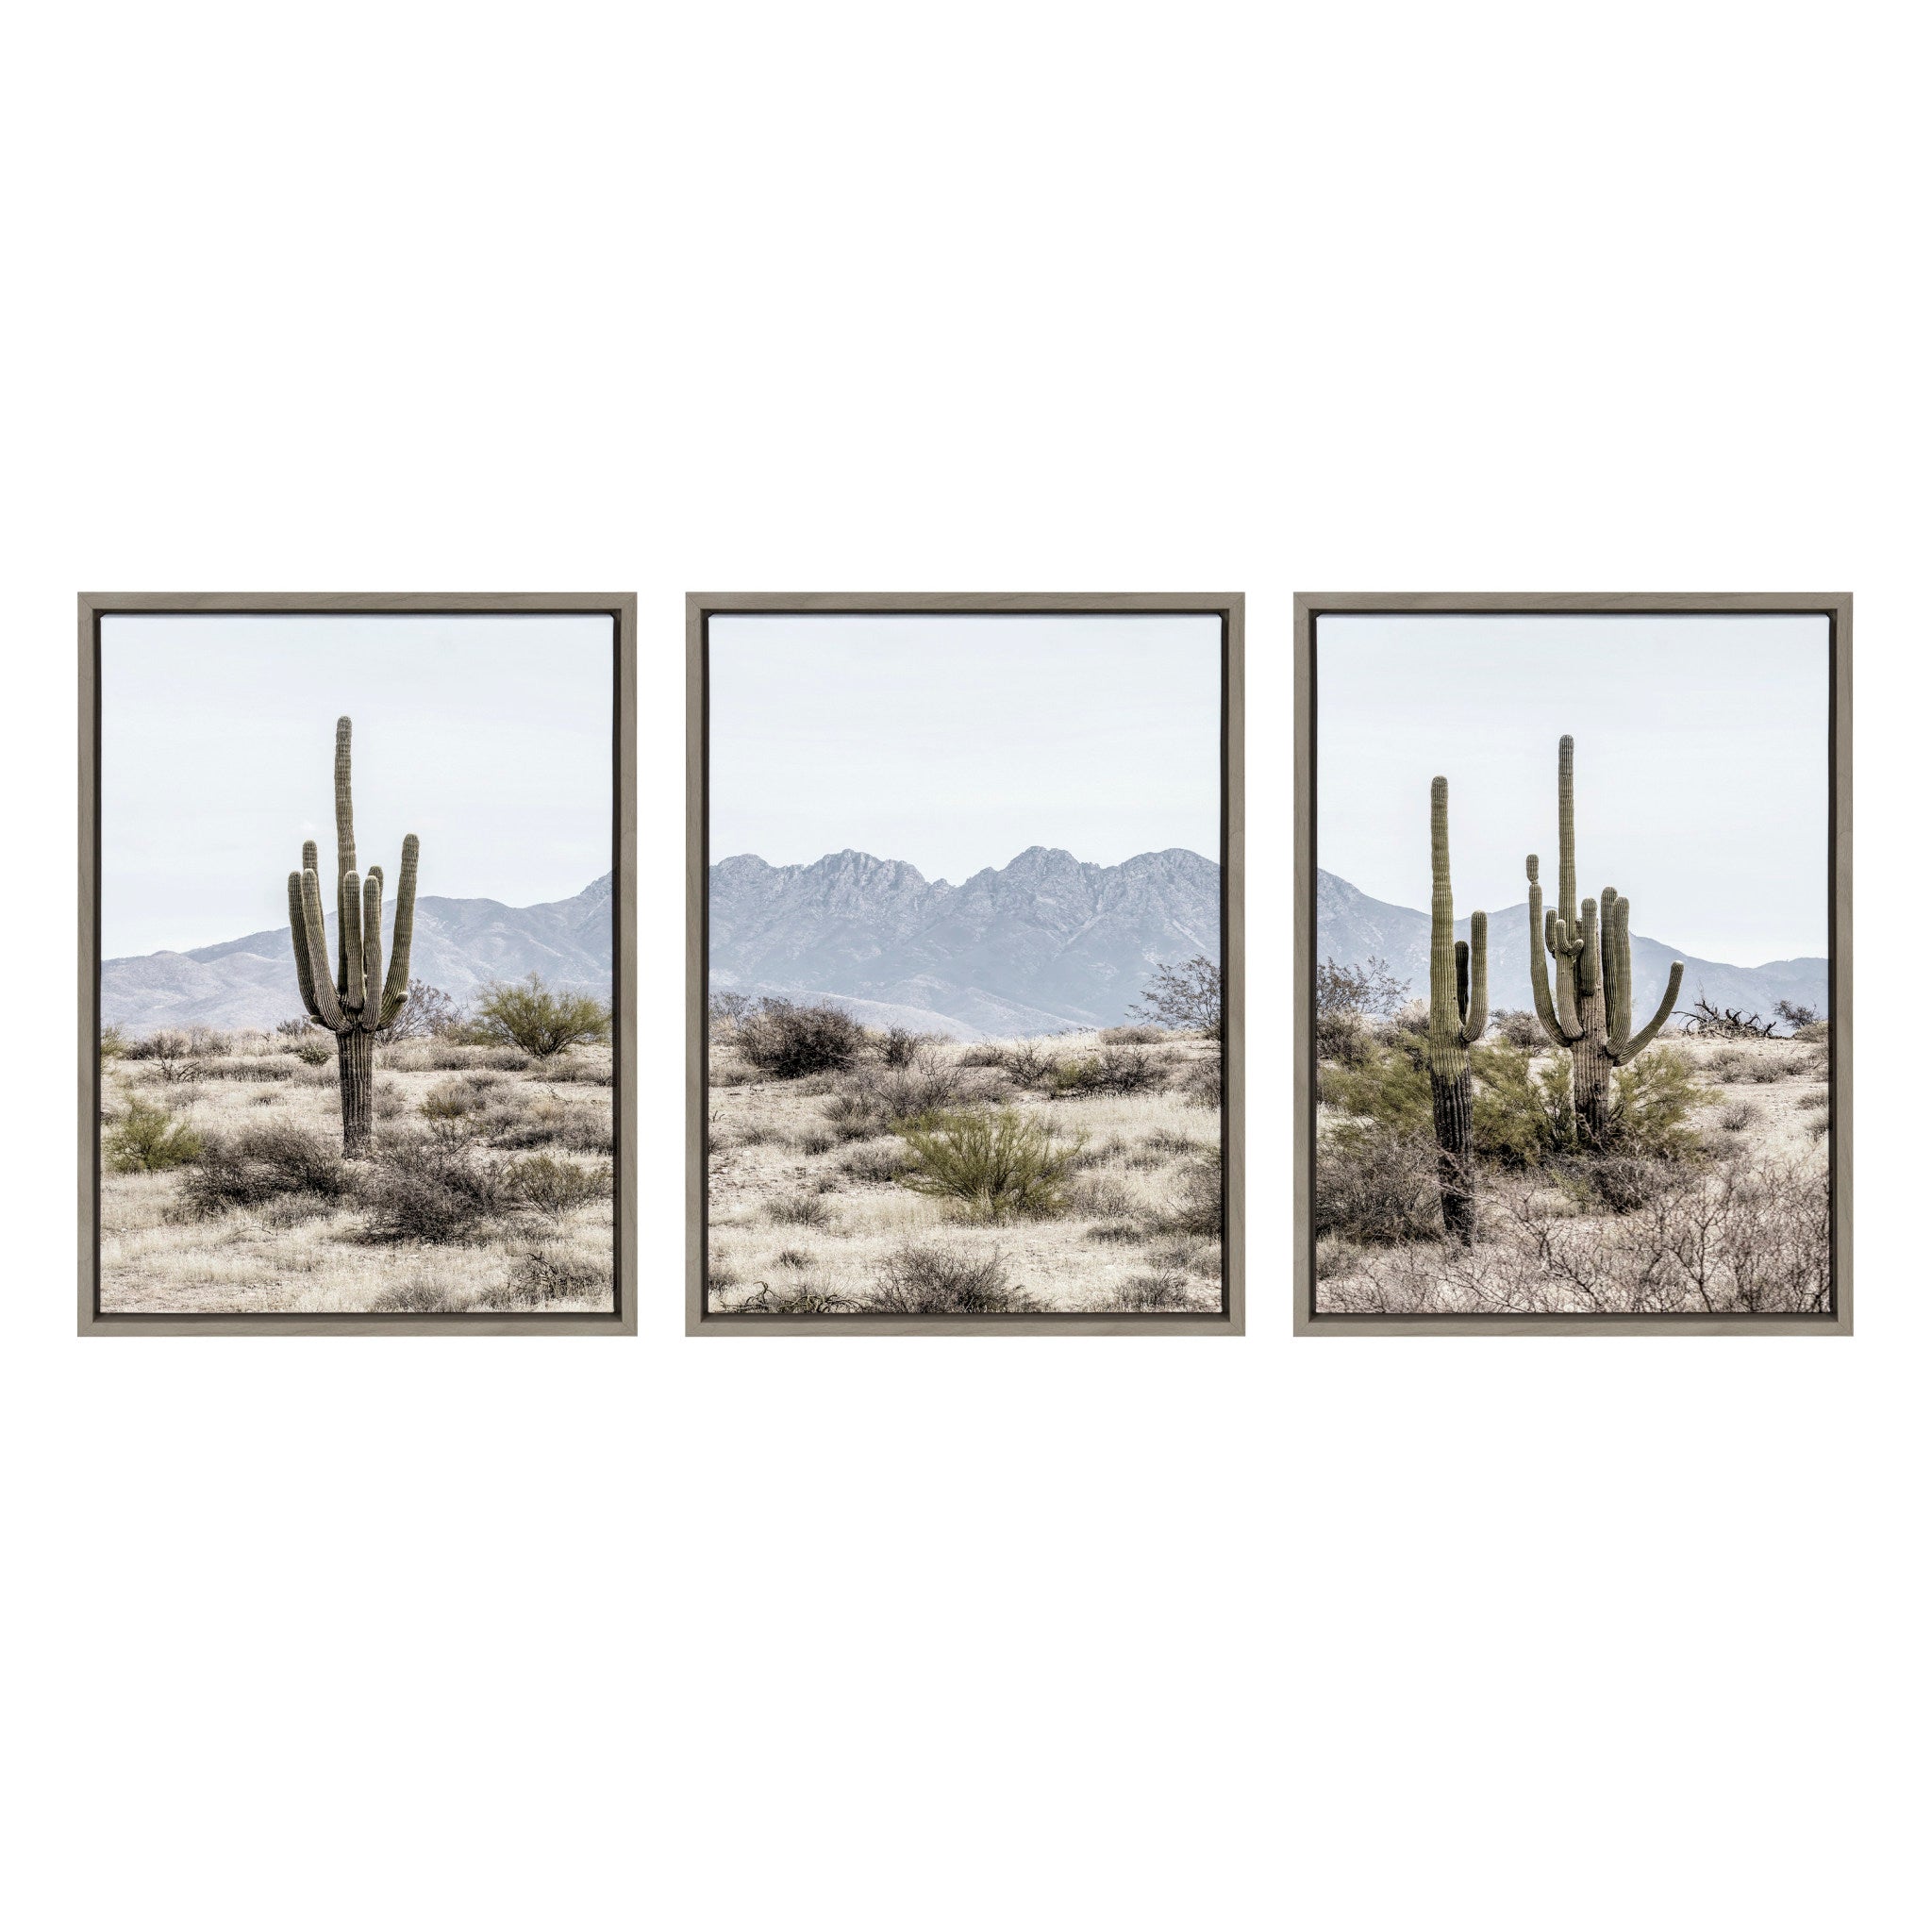 Sylvie Tall Saguaro Cacti Desert Mountain Left, Middle and Right Framed Canvas by The Creative Bunch Studio